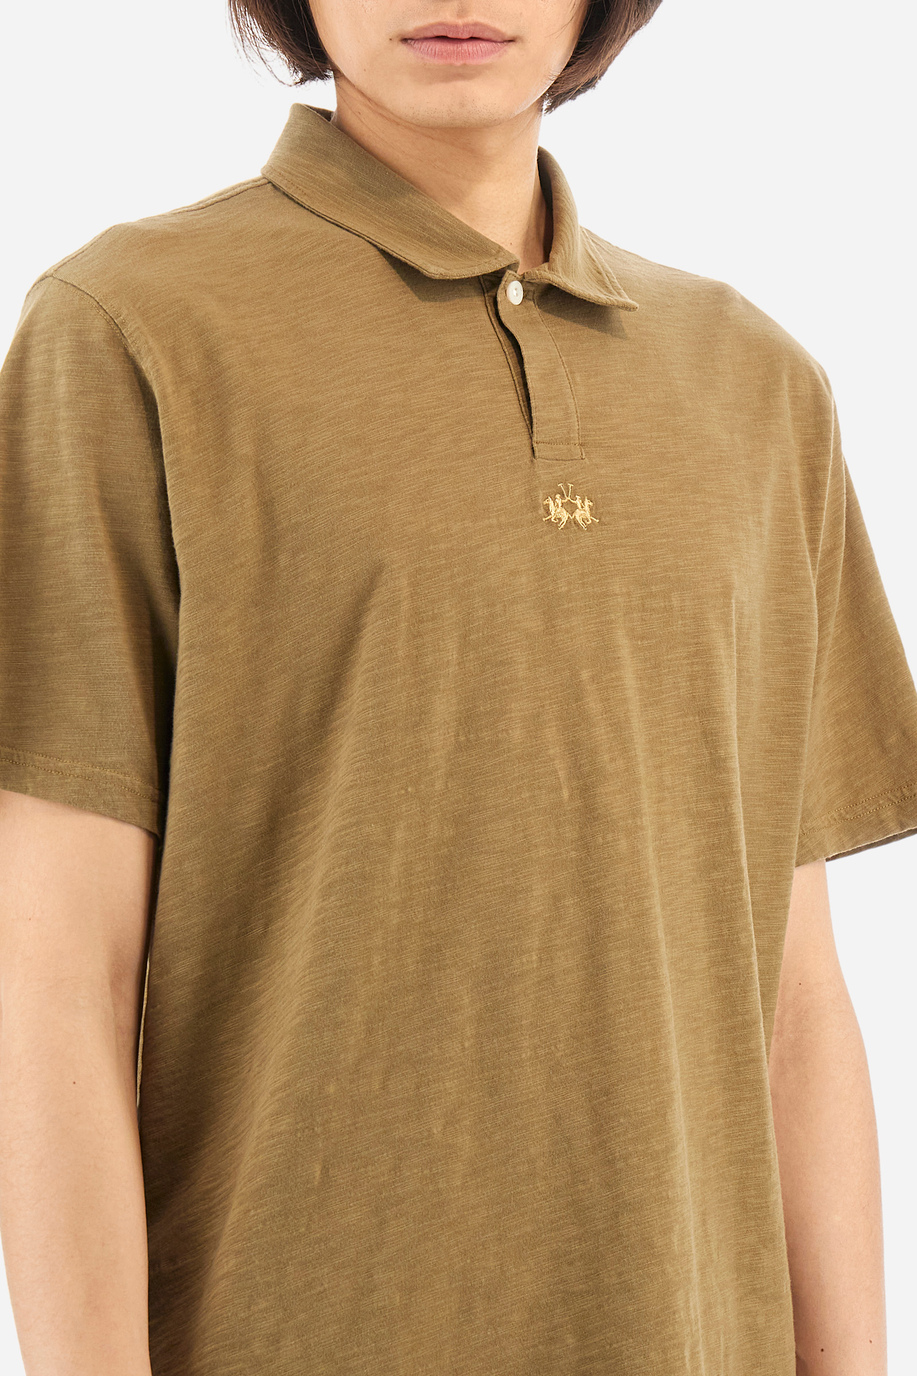 Men's polo shirt in a regular fit - Polo 19-42 - XLarge sizes | La Martina - Official Online Shop